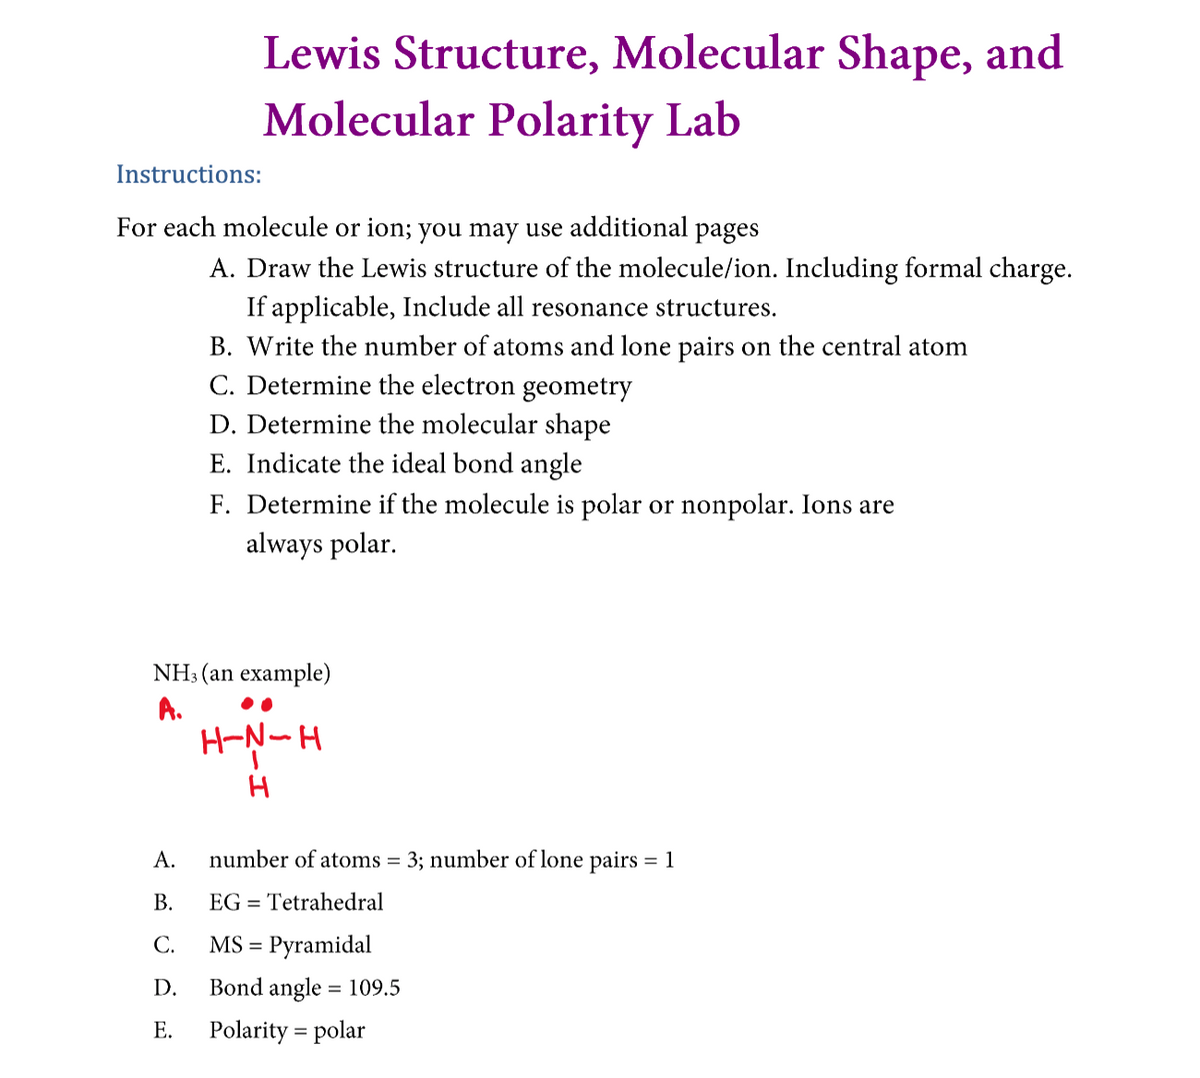 Lewis Structure, Molecular Shape, and
Molecular Polarity Lab
Instructions:
For each molecule or ion; you may use additional pages
A. Draw the Lewis structure of the molecule/ion. Including formal charge.
If applicable, Include all resonance structures.
B. Write the number of atoms and lone pairs on the central atom
C. Determine the electron geometry
D. Determine the molecular shape
E. Indicate the ideal bond angle
F. Determine if the molecule is polar or nonpolar. Ions are
always polar.
NH3 (an example)
A.
H-N-H
А.
number of atoms = 3; number of lone pairs = 1
В.
EG = Tetrahedral
С.
MS =
Pyramidal
D.
Bond angle = 109.5
Е.
Polarity = polar
